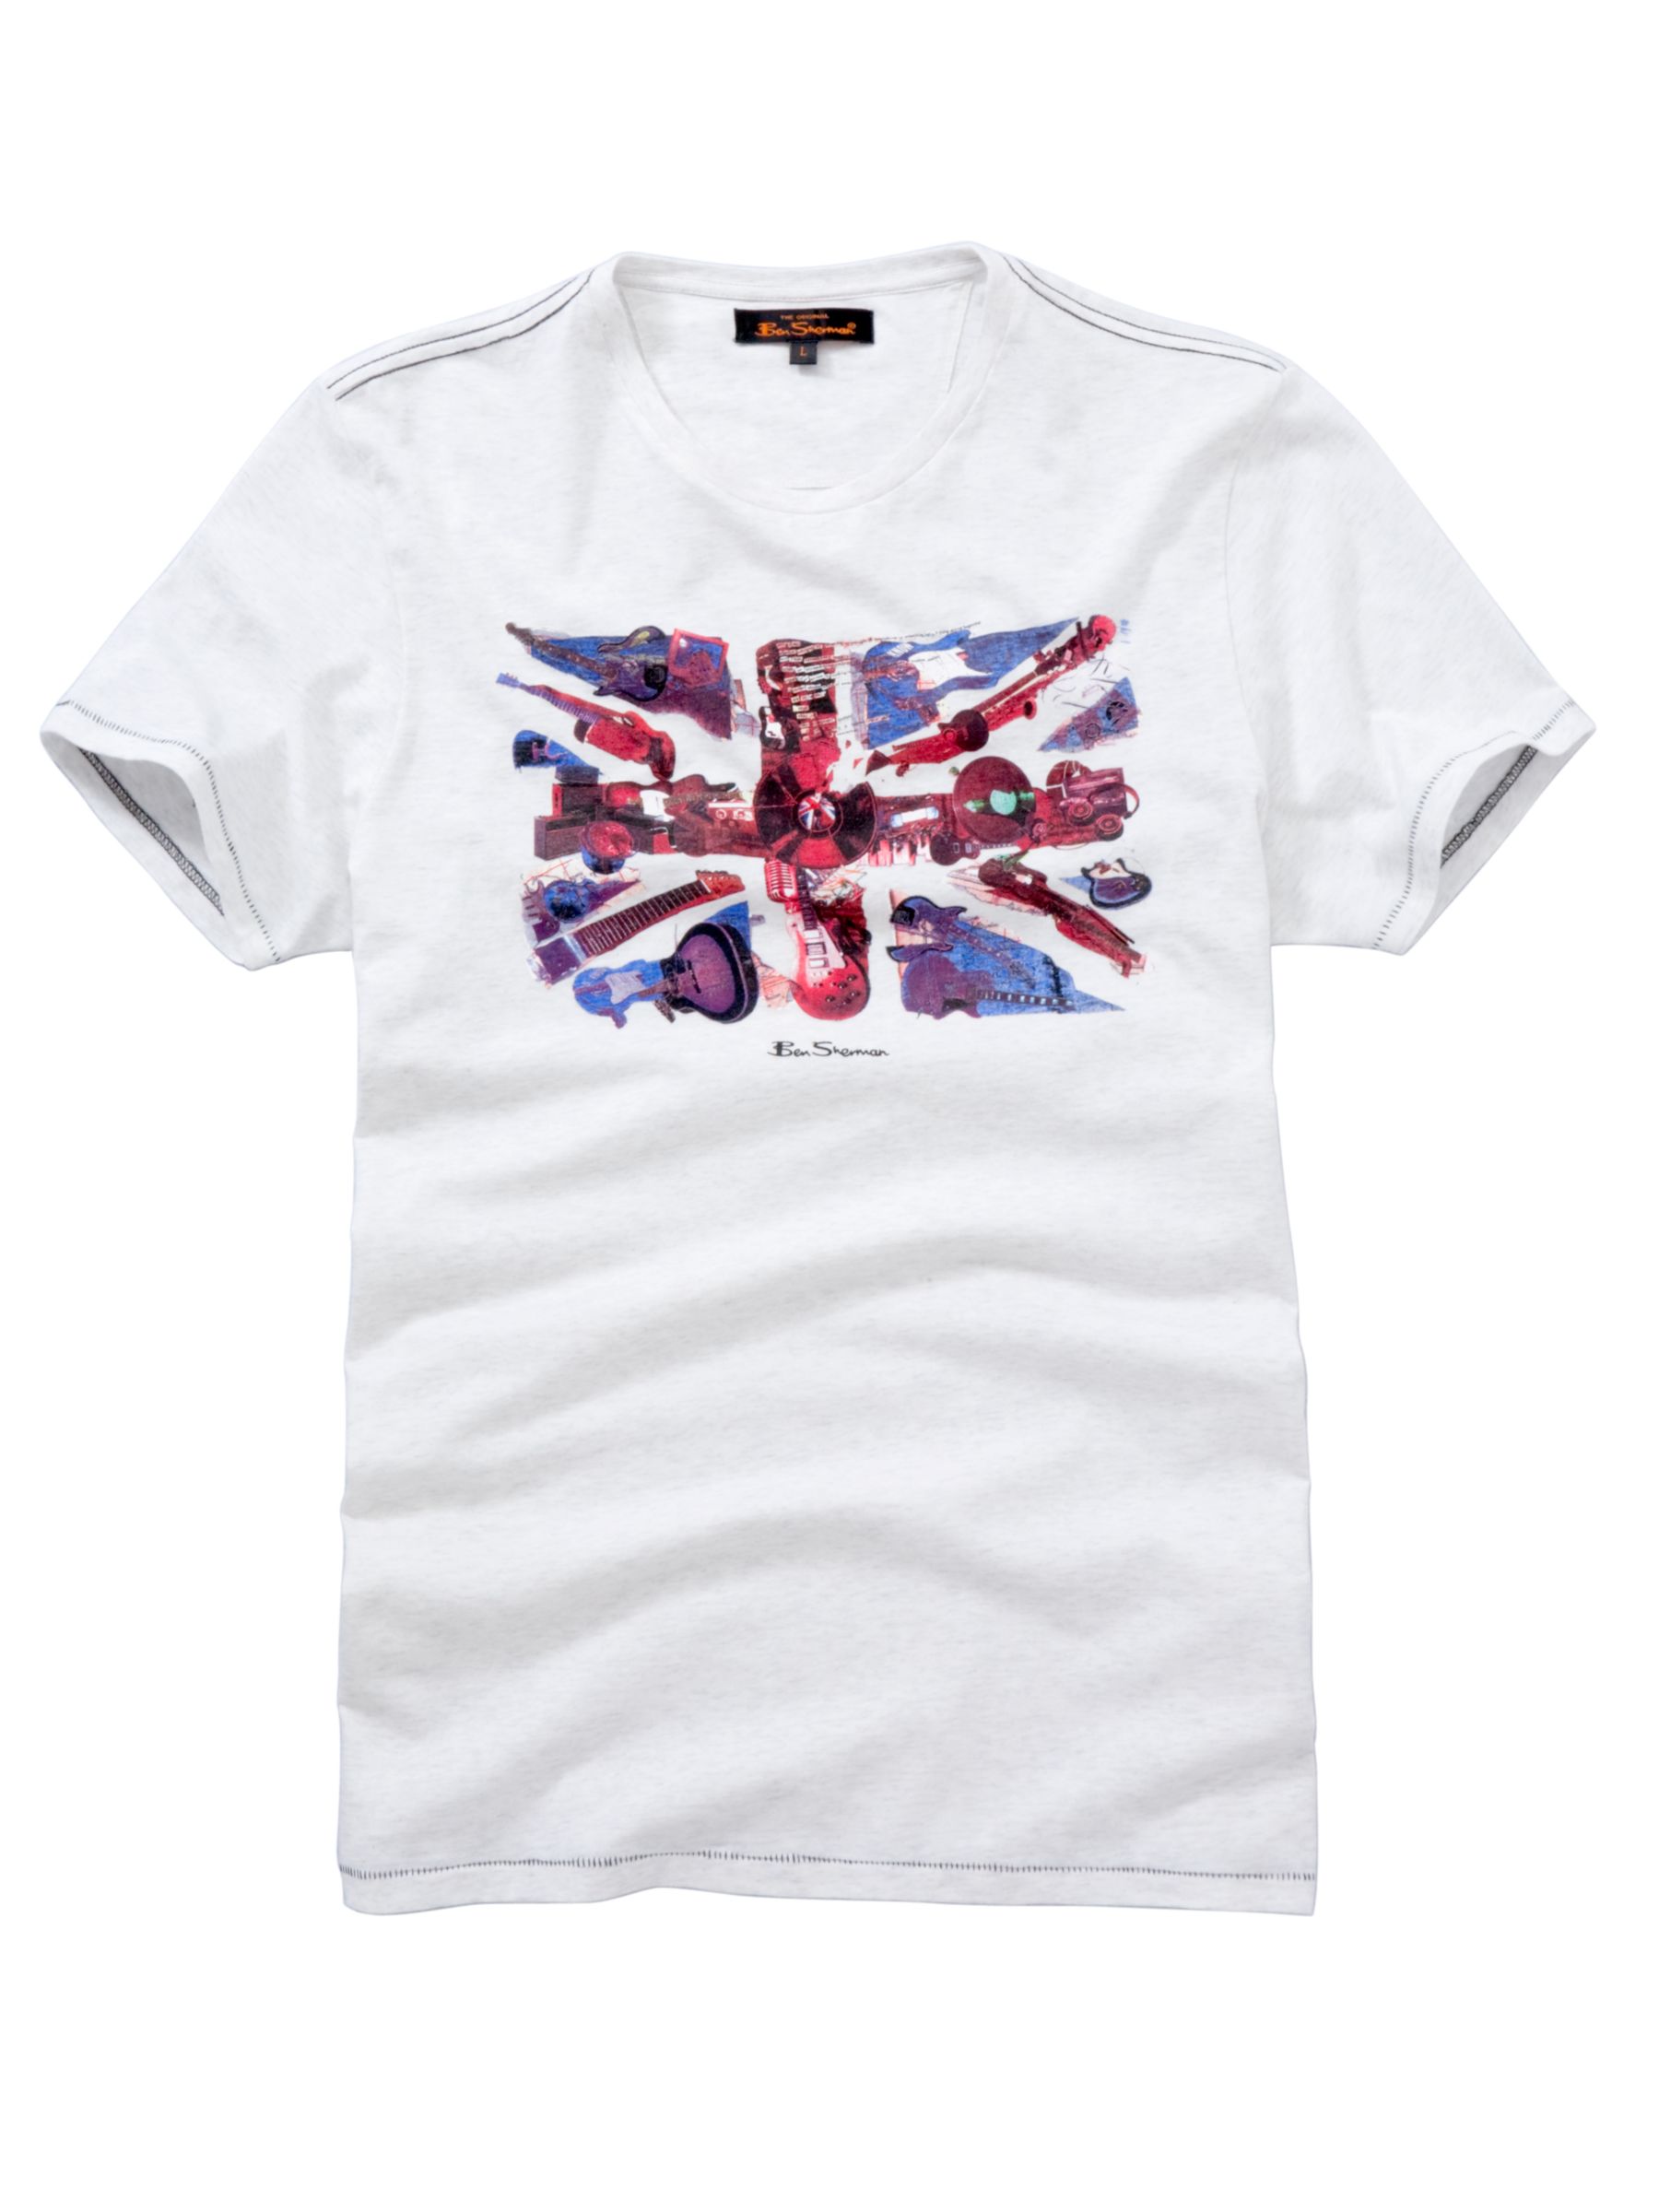 Ben Sherman Union Jack T-Shirt, Cream Marl - review, compare prices ...